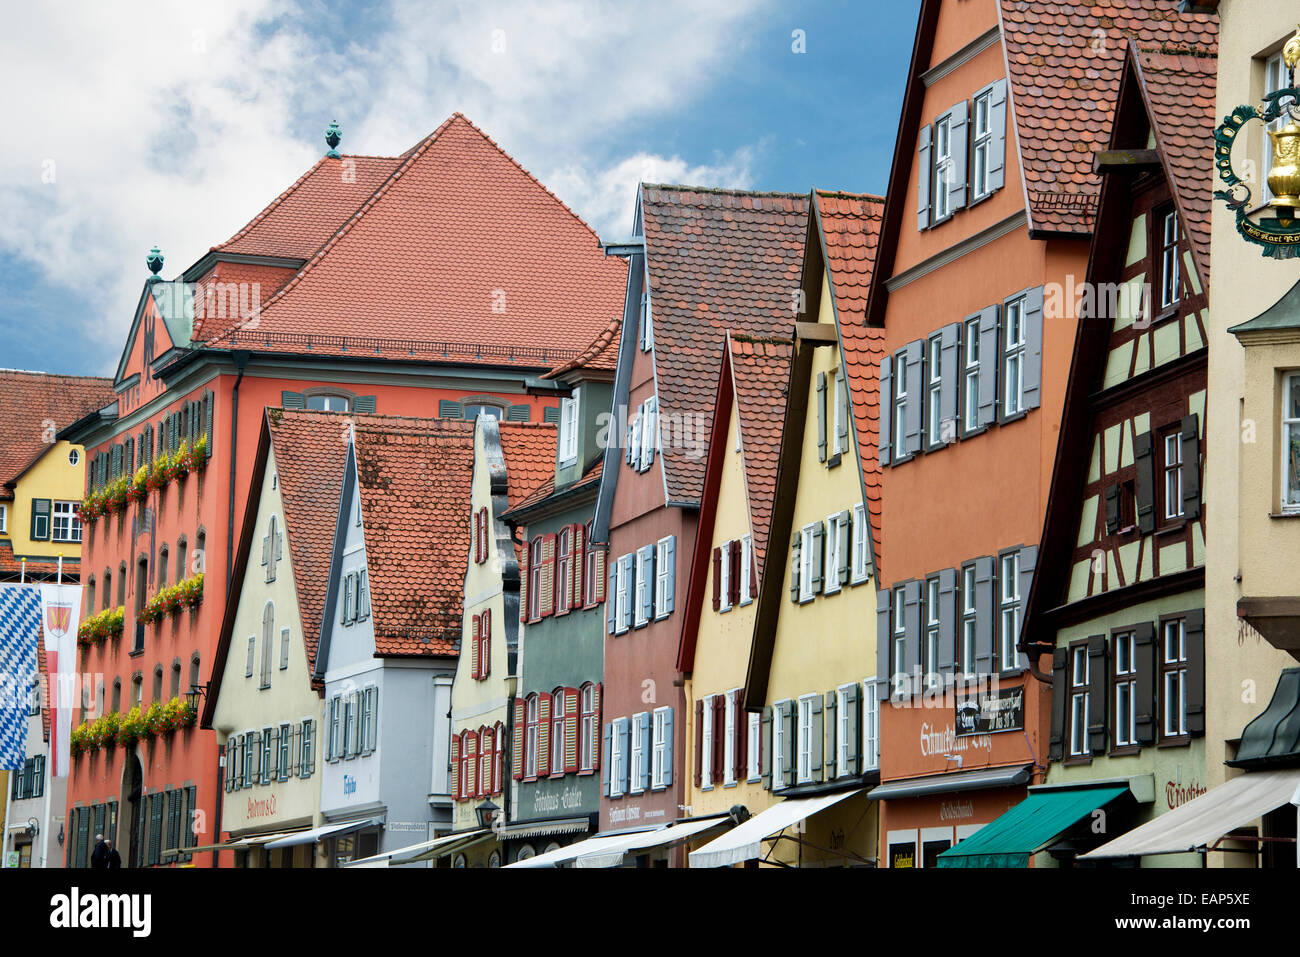 Colourful facades of buildings Nordlingen Germany Stock Photo